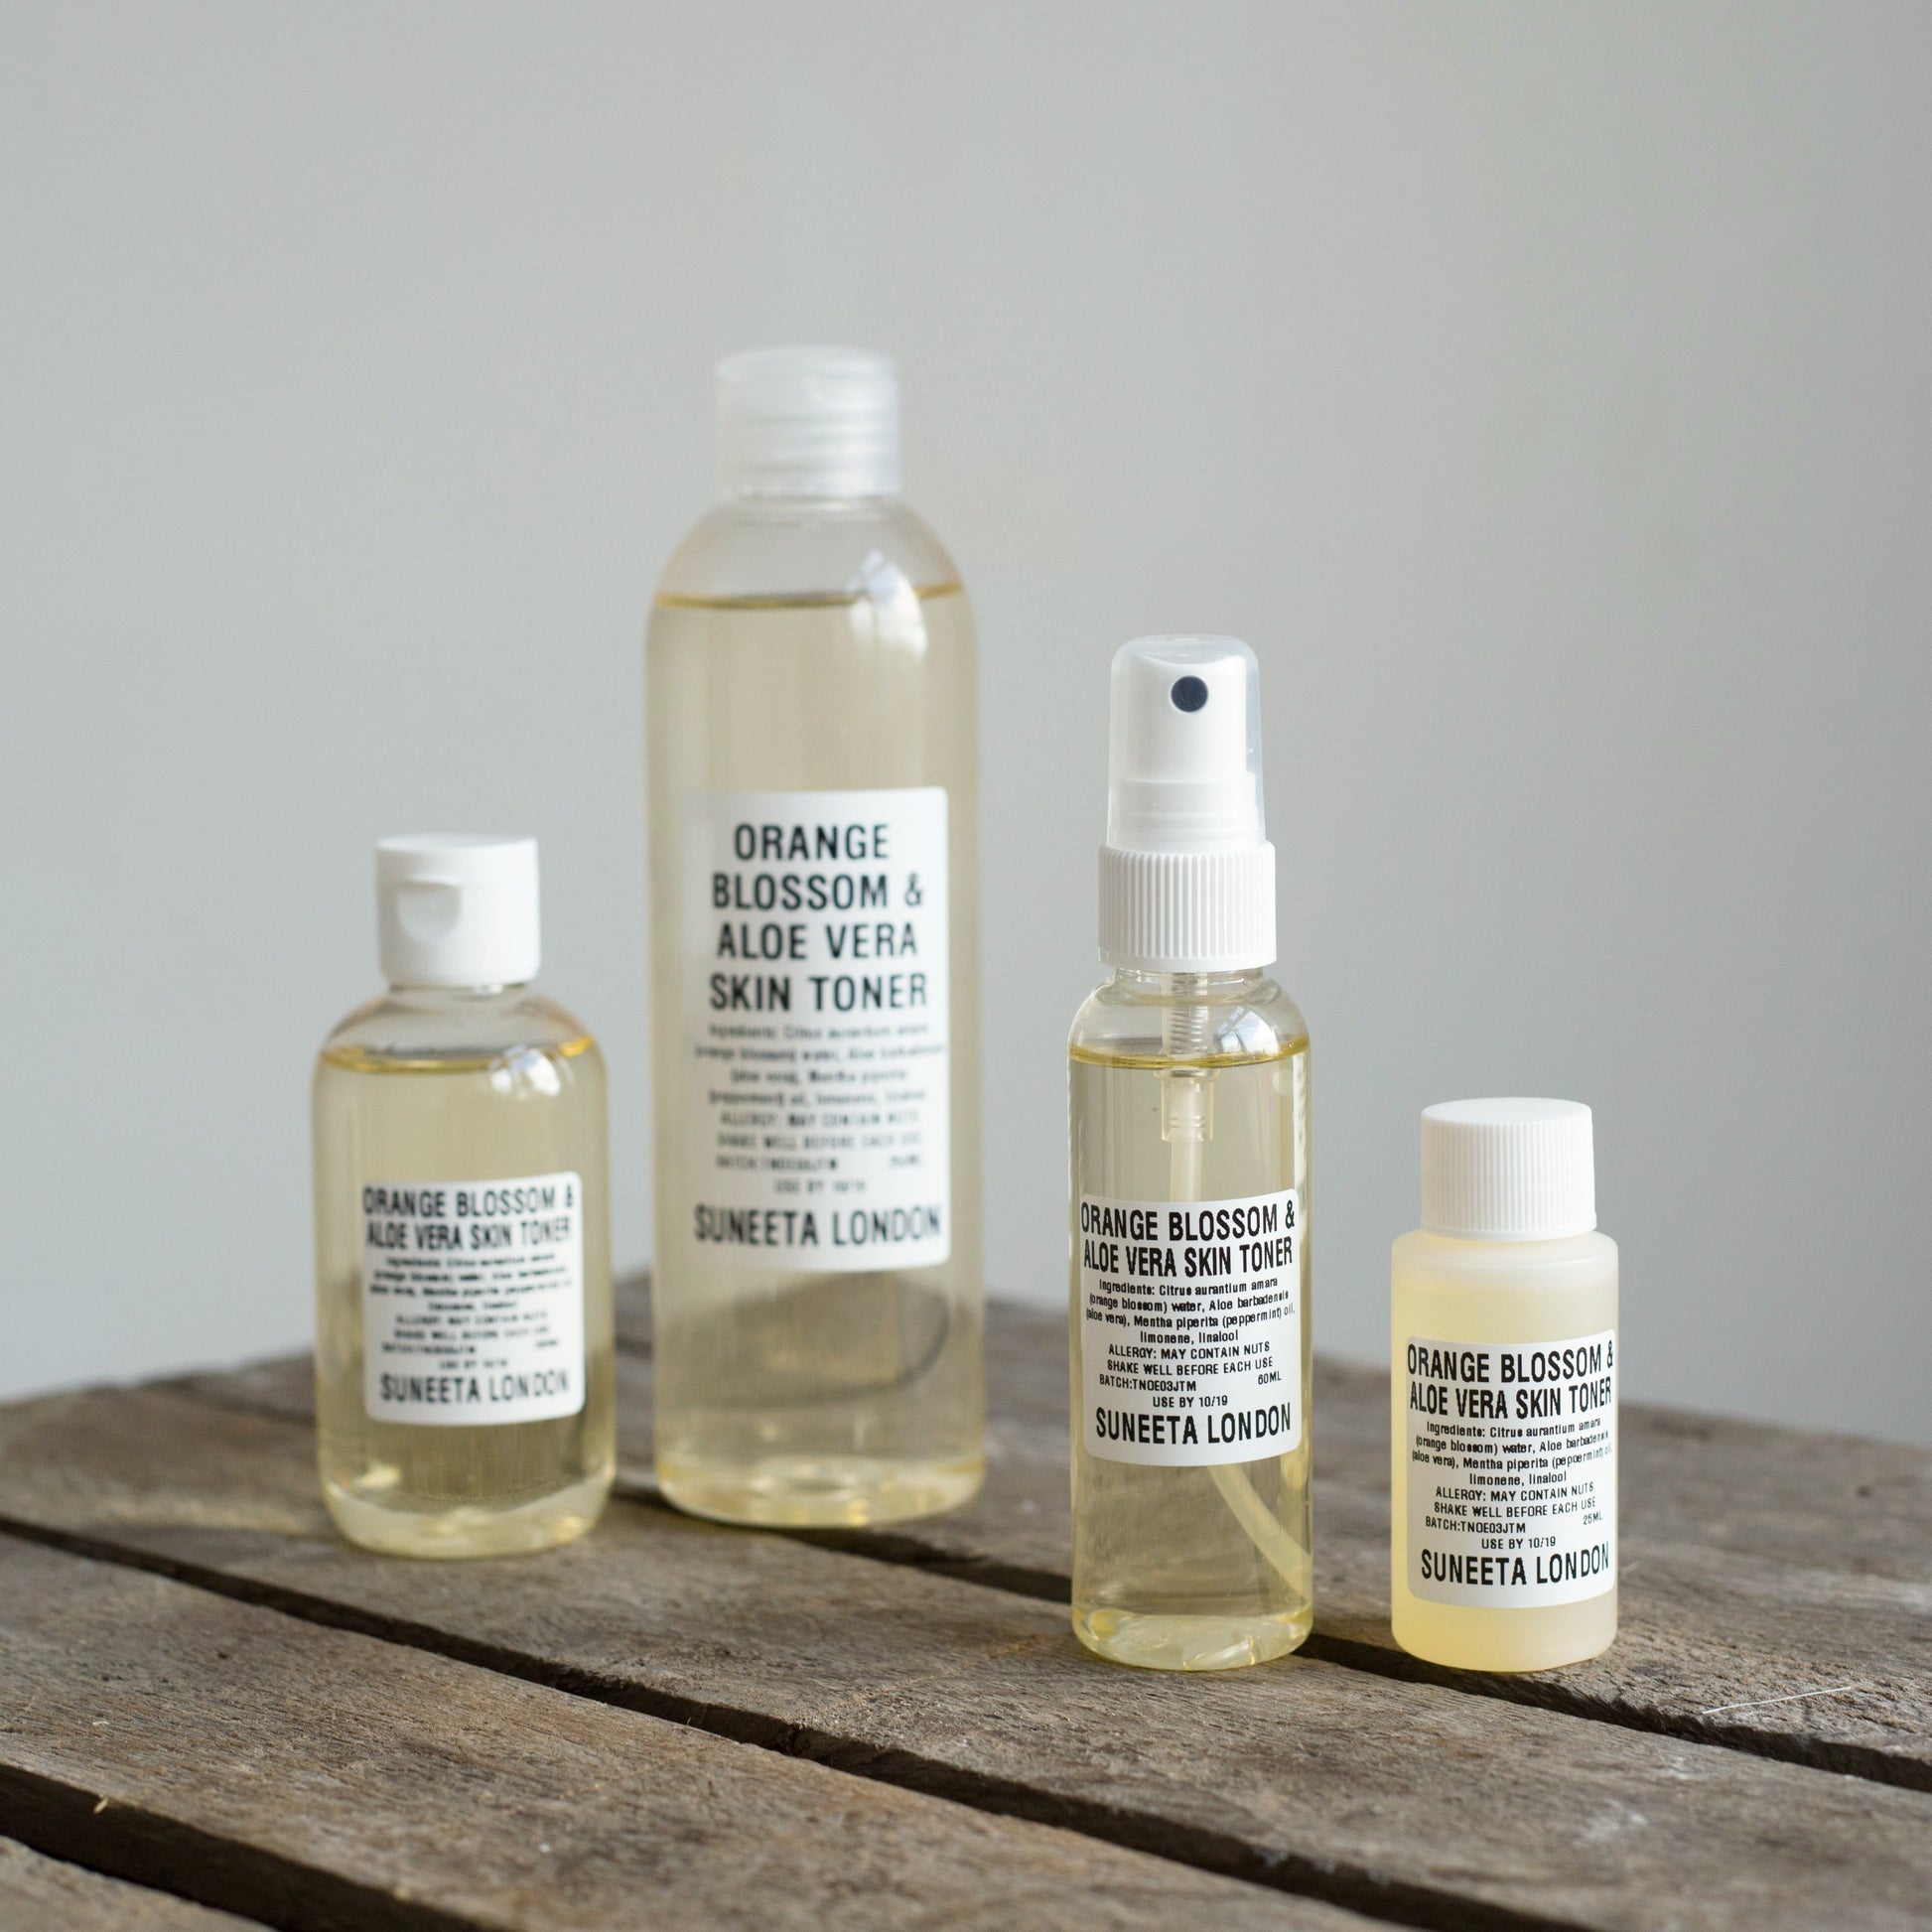 orange blossom aloe vera skin toner in various sizes, by suneeta London x weigh and pay